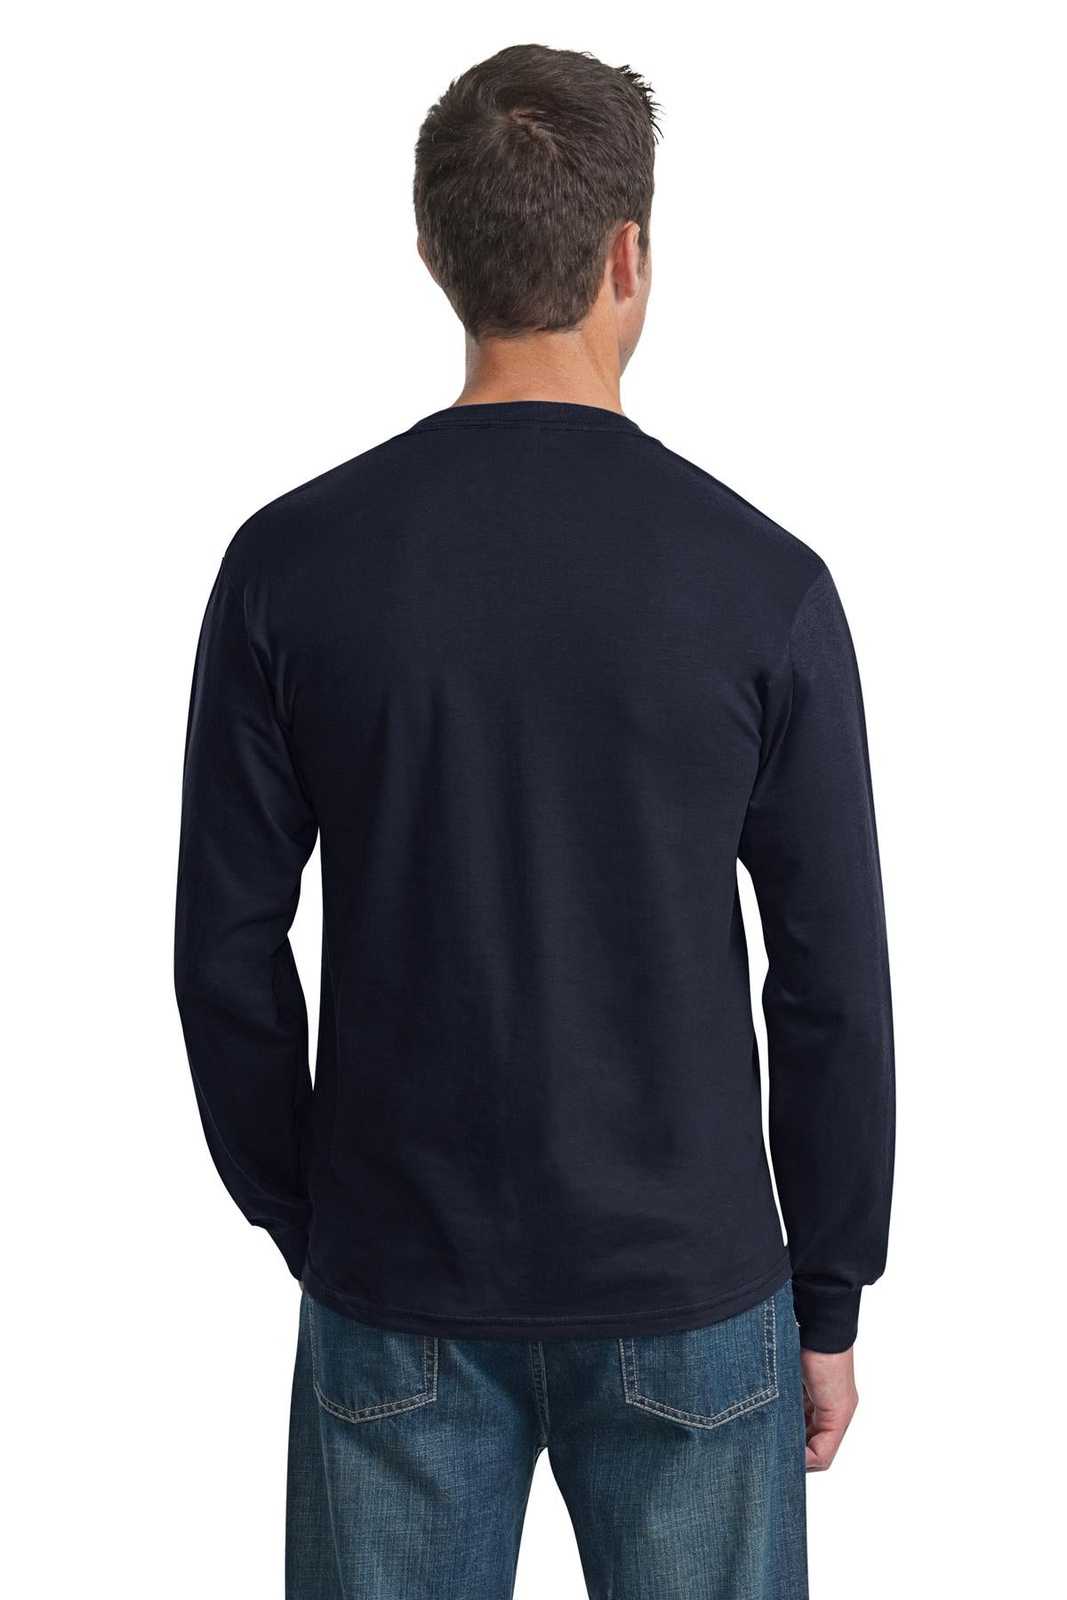 Fruit of the Loom 4930 HD Cotton 100% Cotton Long Sleeve T-Shirt - Navy - HIT a Double